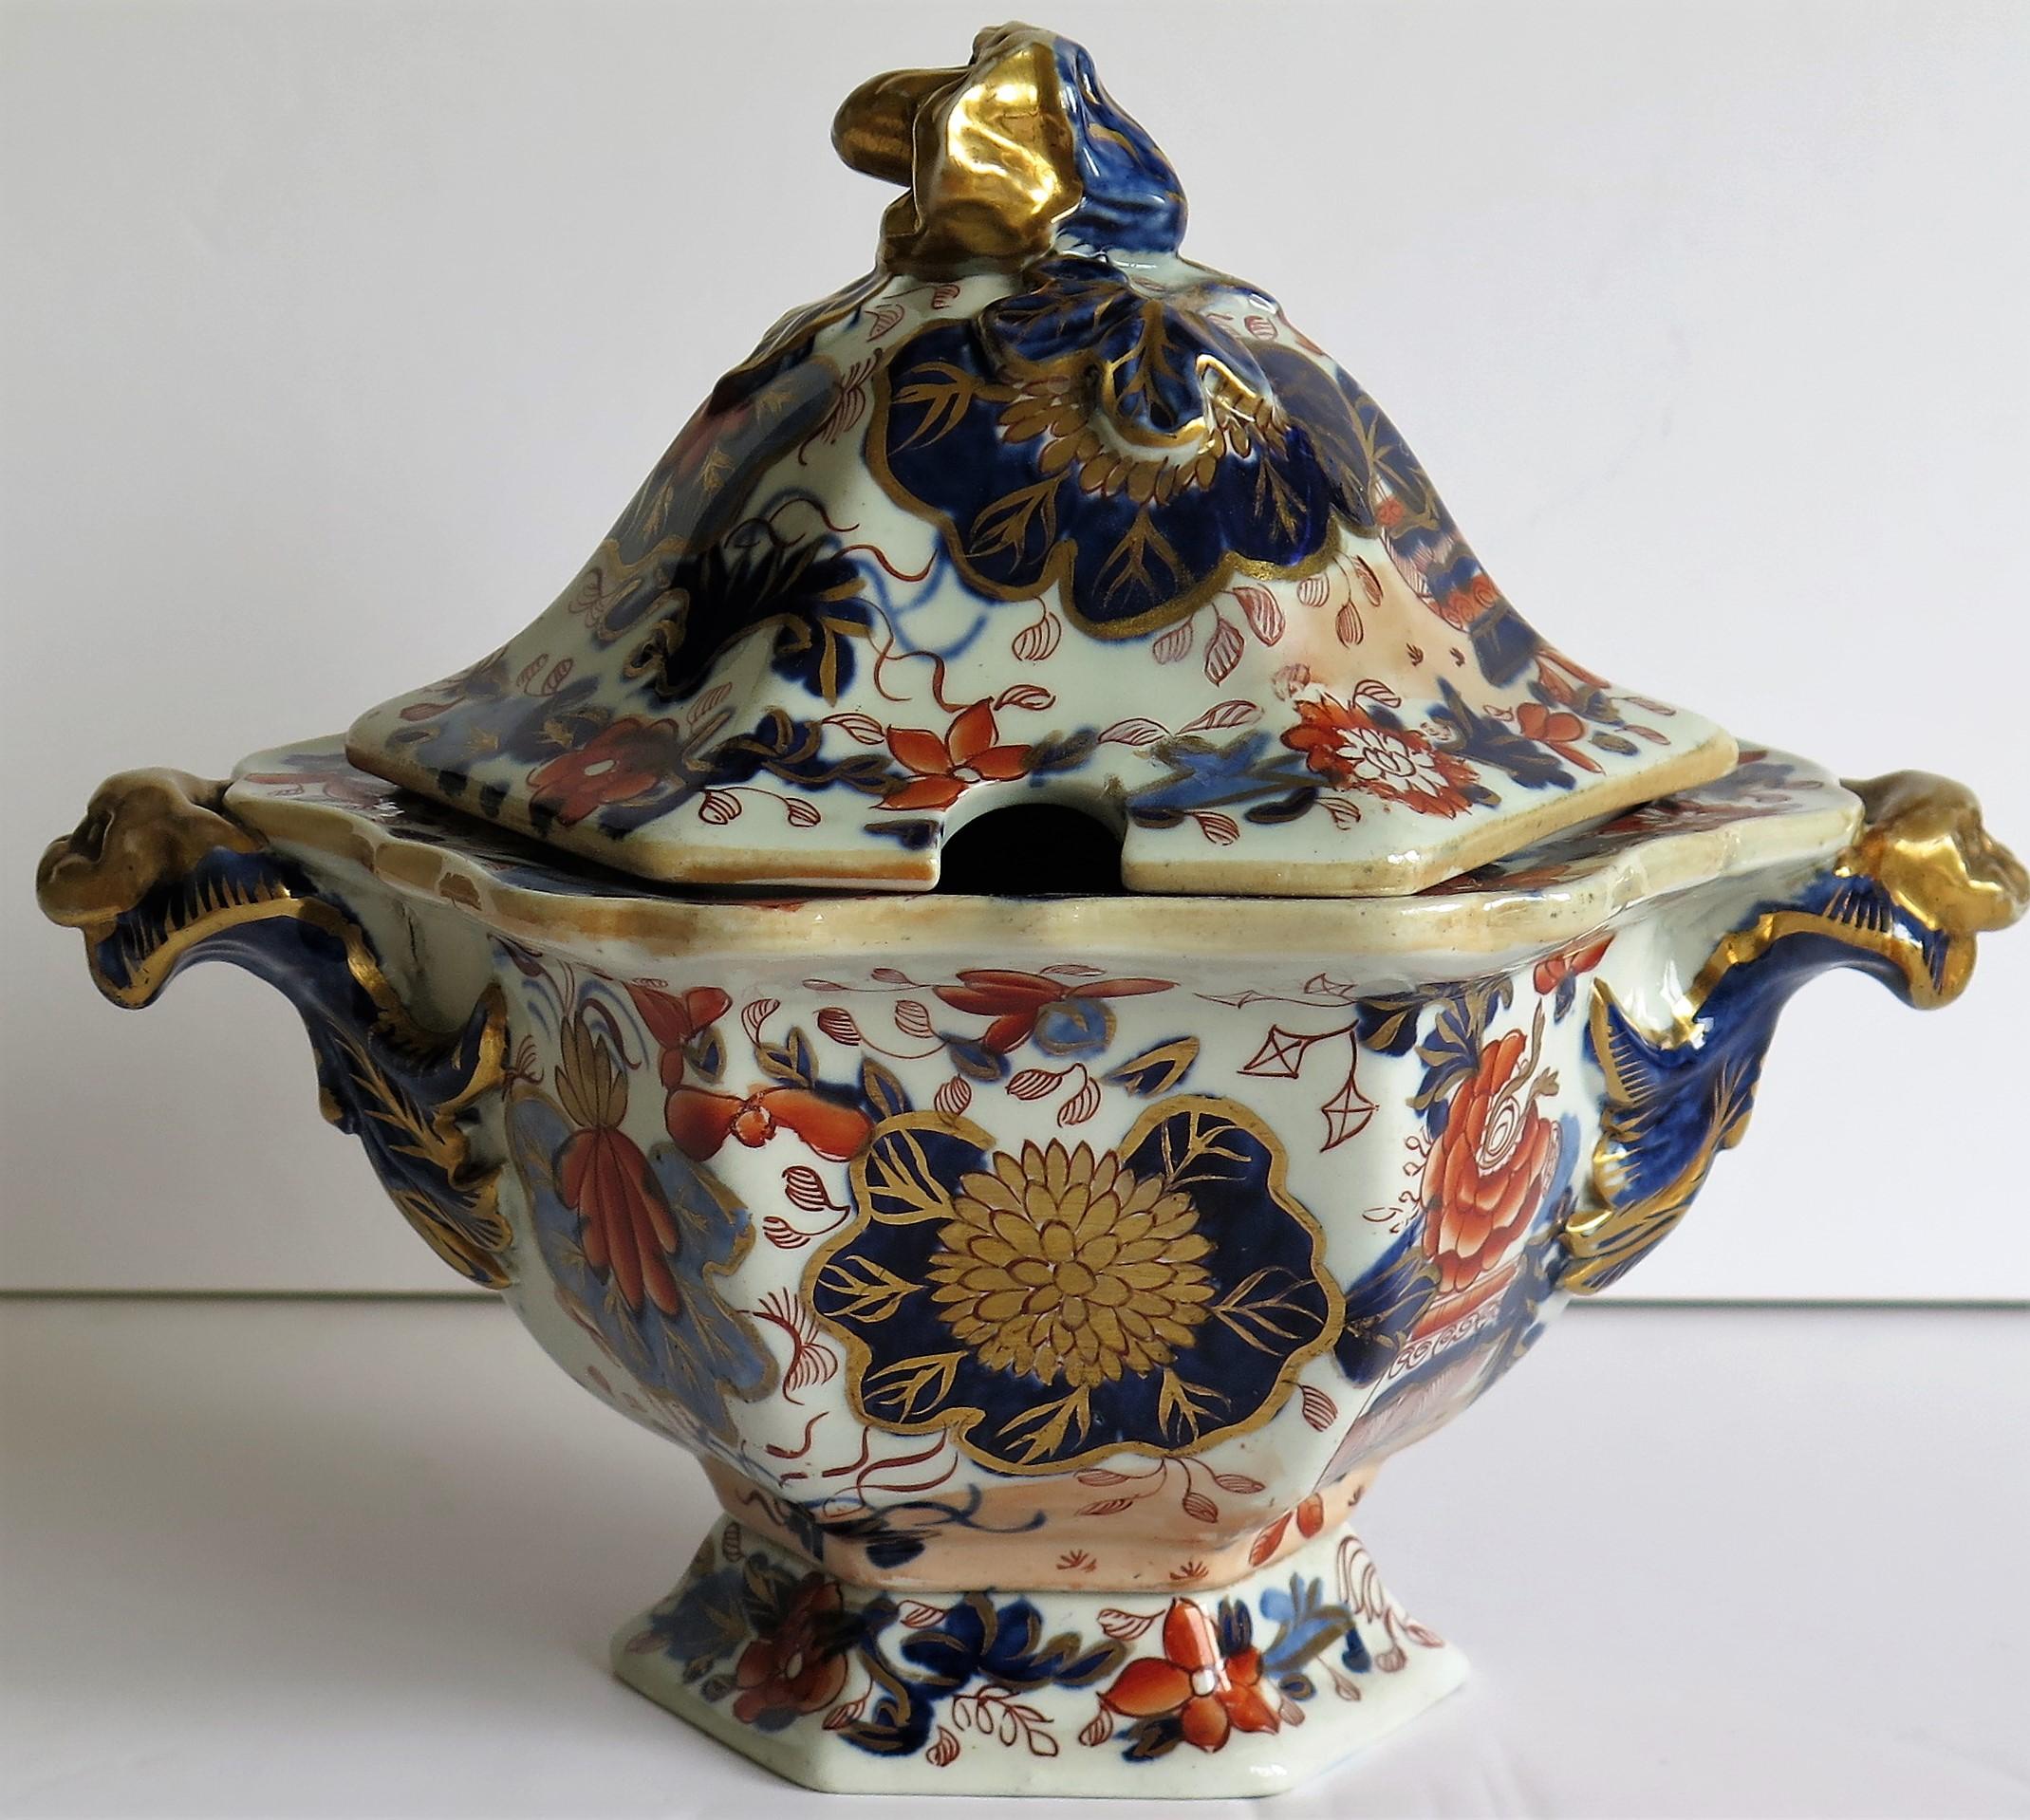 This is a superb Ironstone Sauce Tureen, complete with lid , made by Mason's of Lane Delph, Staffordshire, England, during the early part of the 19th century, circa 1820.

This tureen is well potted and is hexagonal in shape with moulded animal